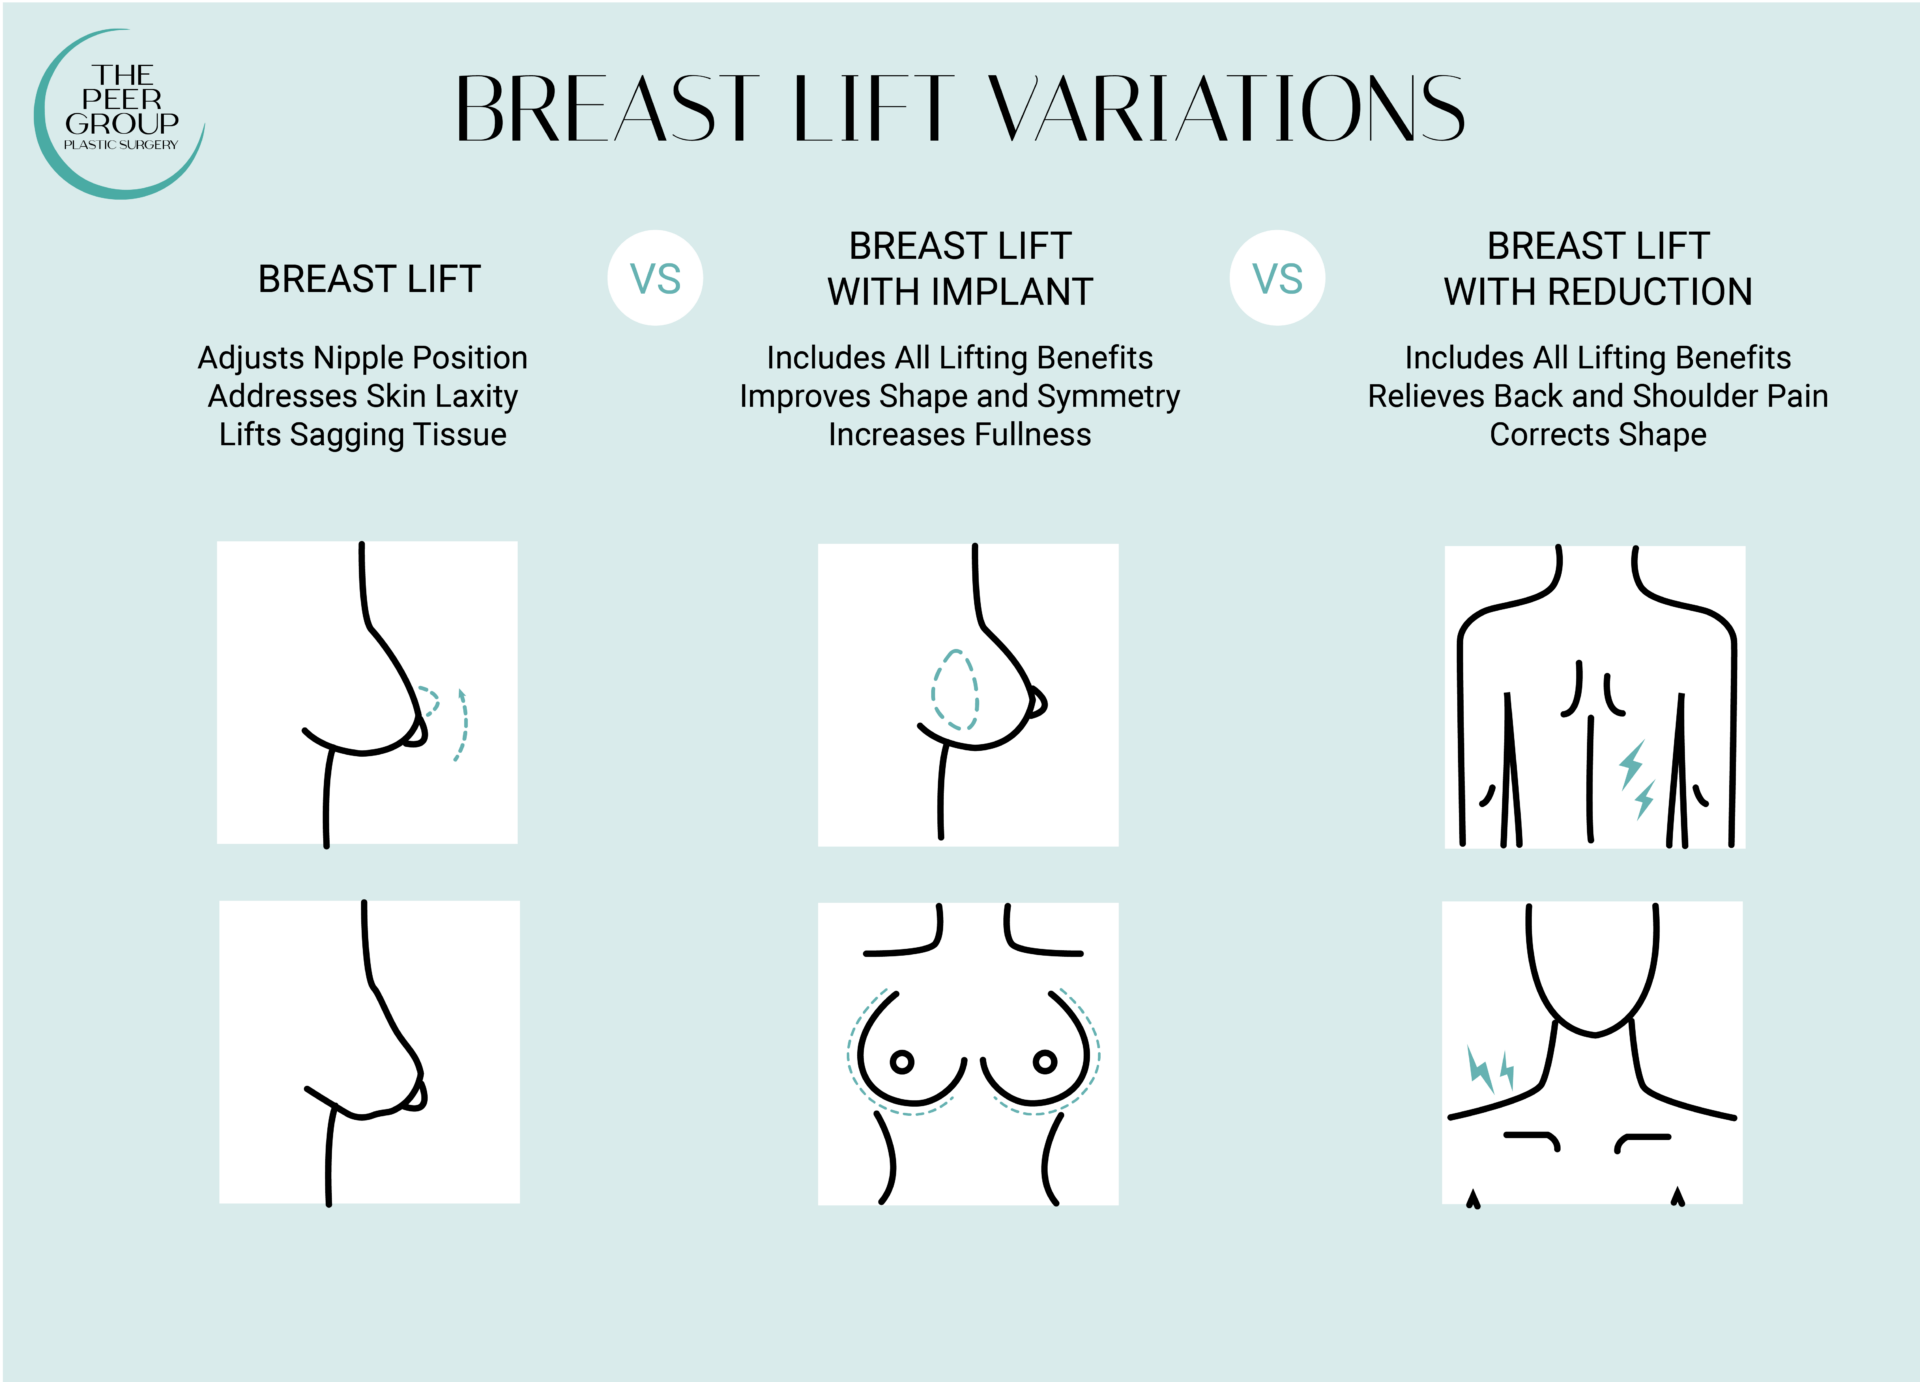 Explore three variations of breast lift at New Jersey’s The Peer Group.